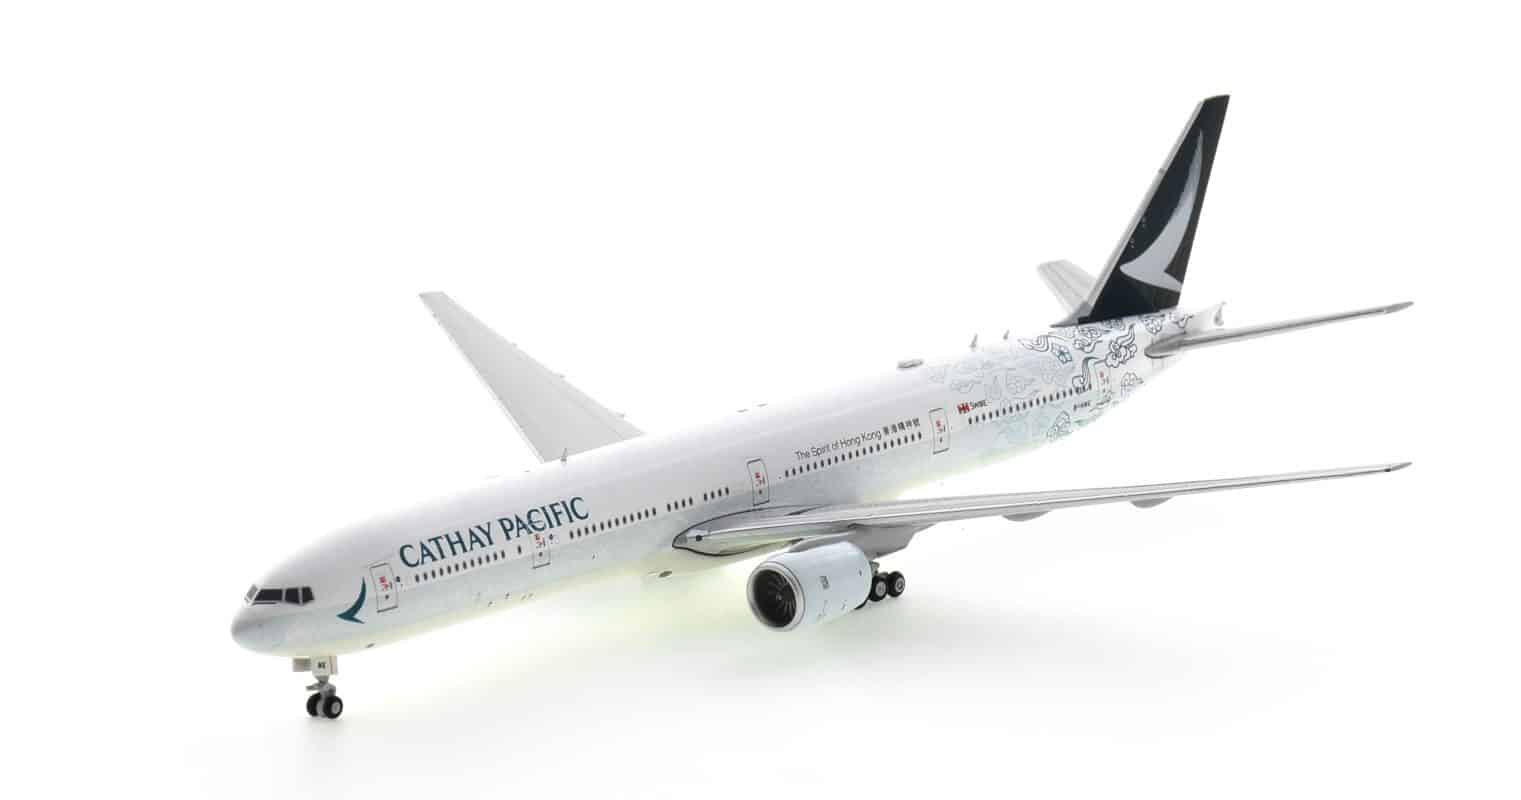 Front port side view of BT400-777-3-001 - 1/200 scale diecast model B777-300 of registration B-HNK in Cathay Pacific's 